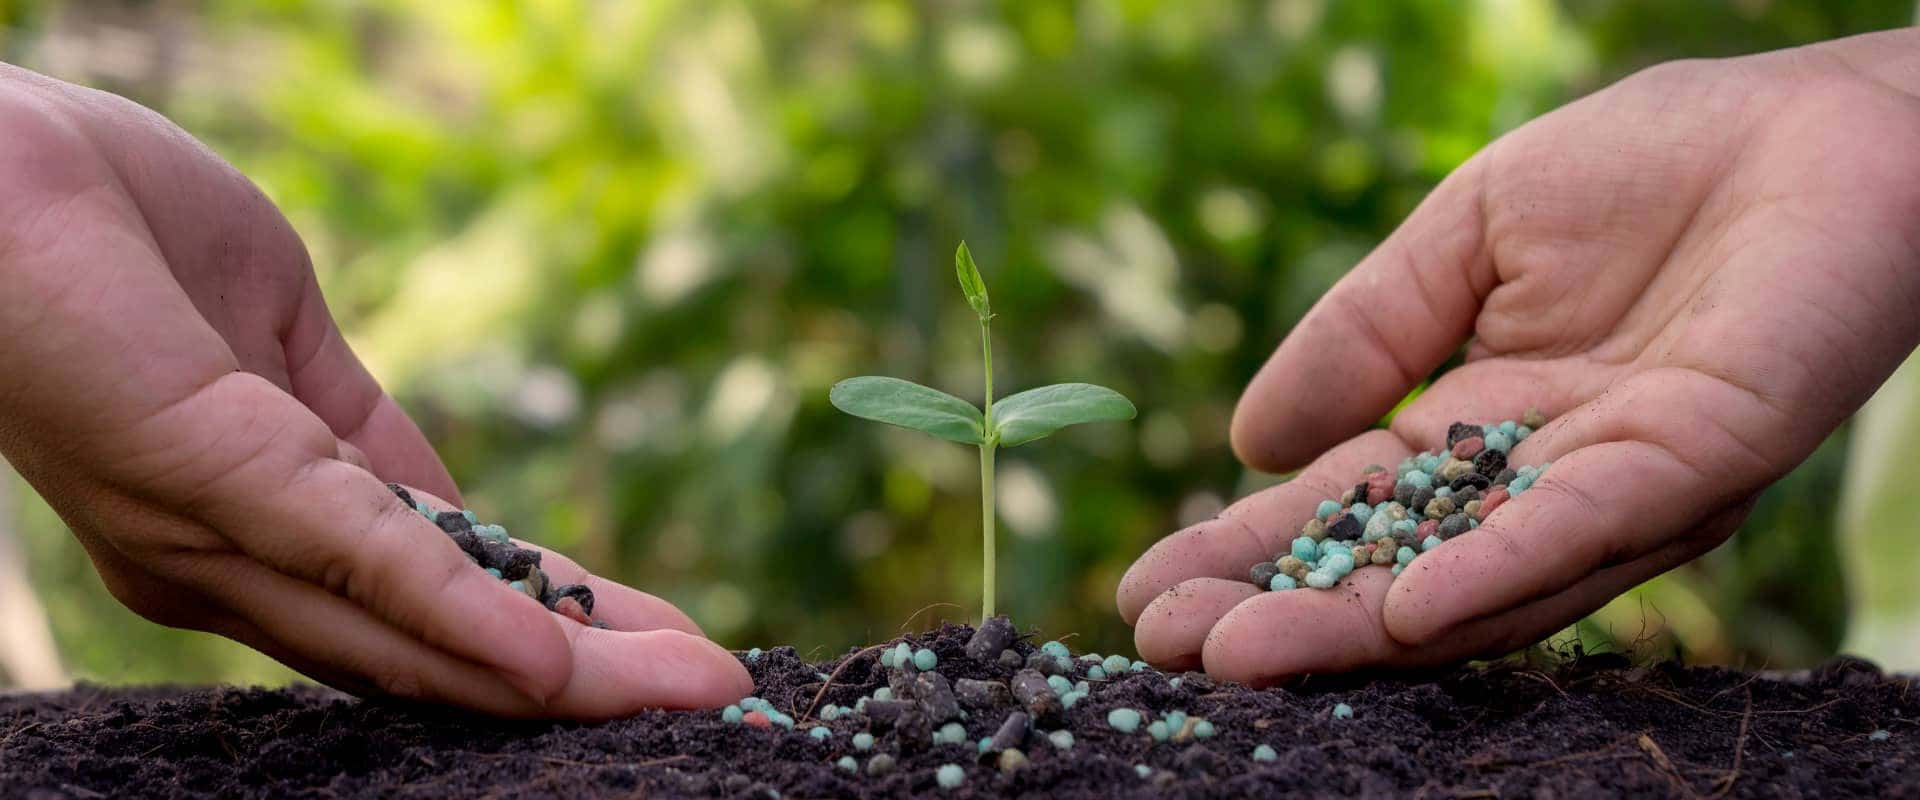 Prospects and market analysis of organic fertilizers